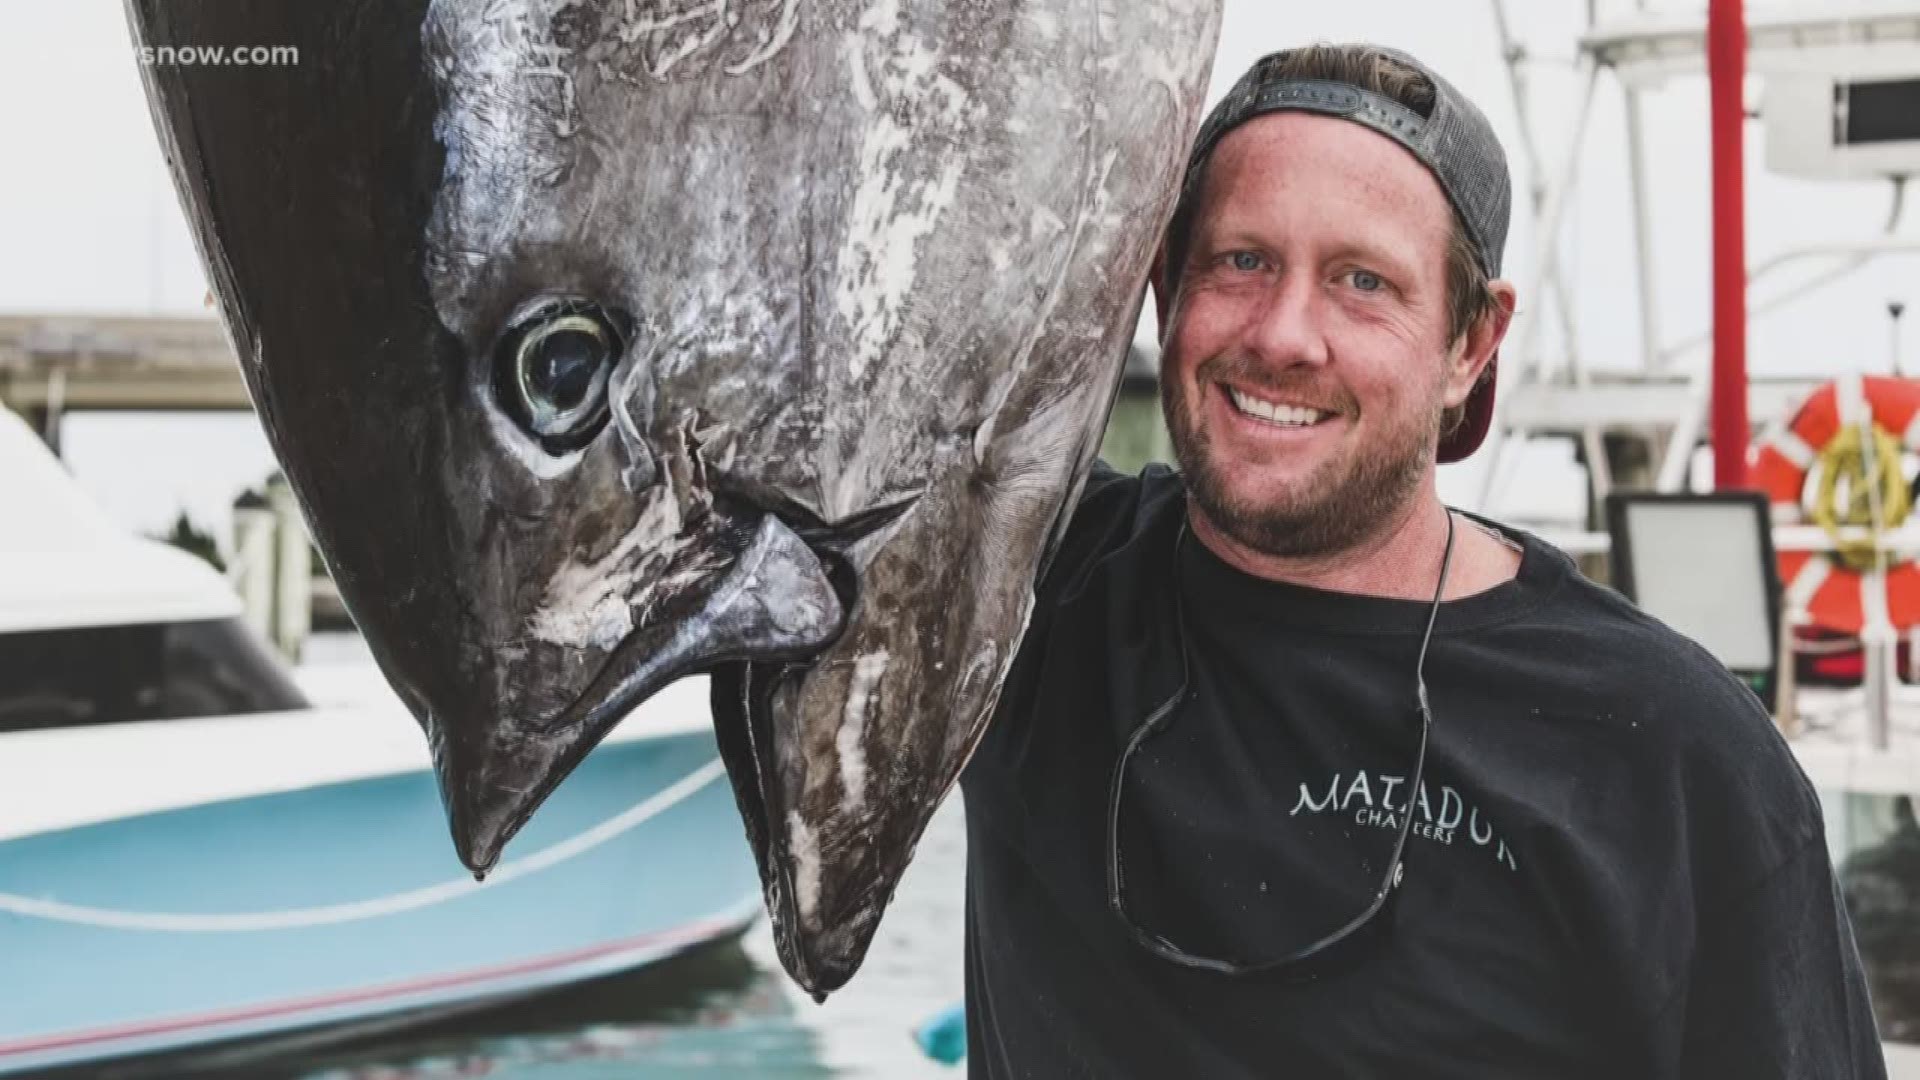 Jake Hiles reeled in the new Virginia state record Bluefin tuna over the weekend.